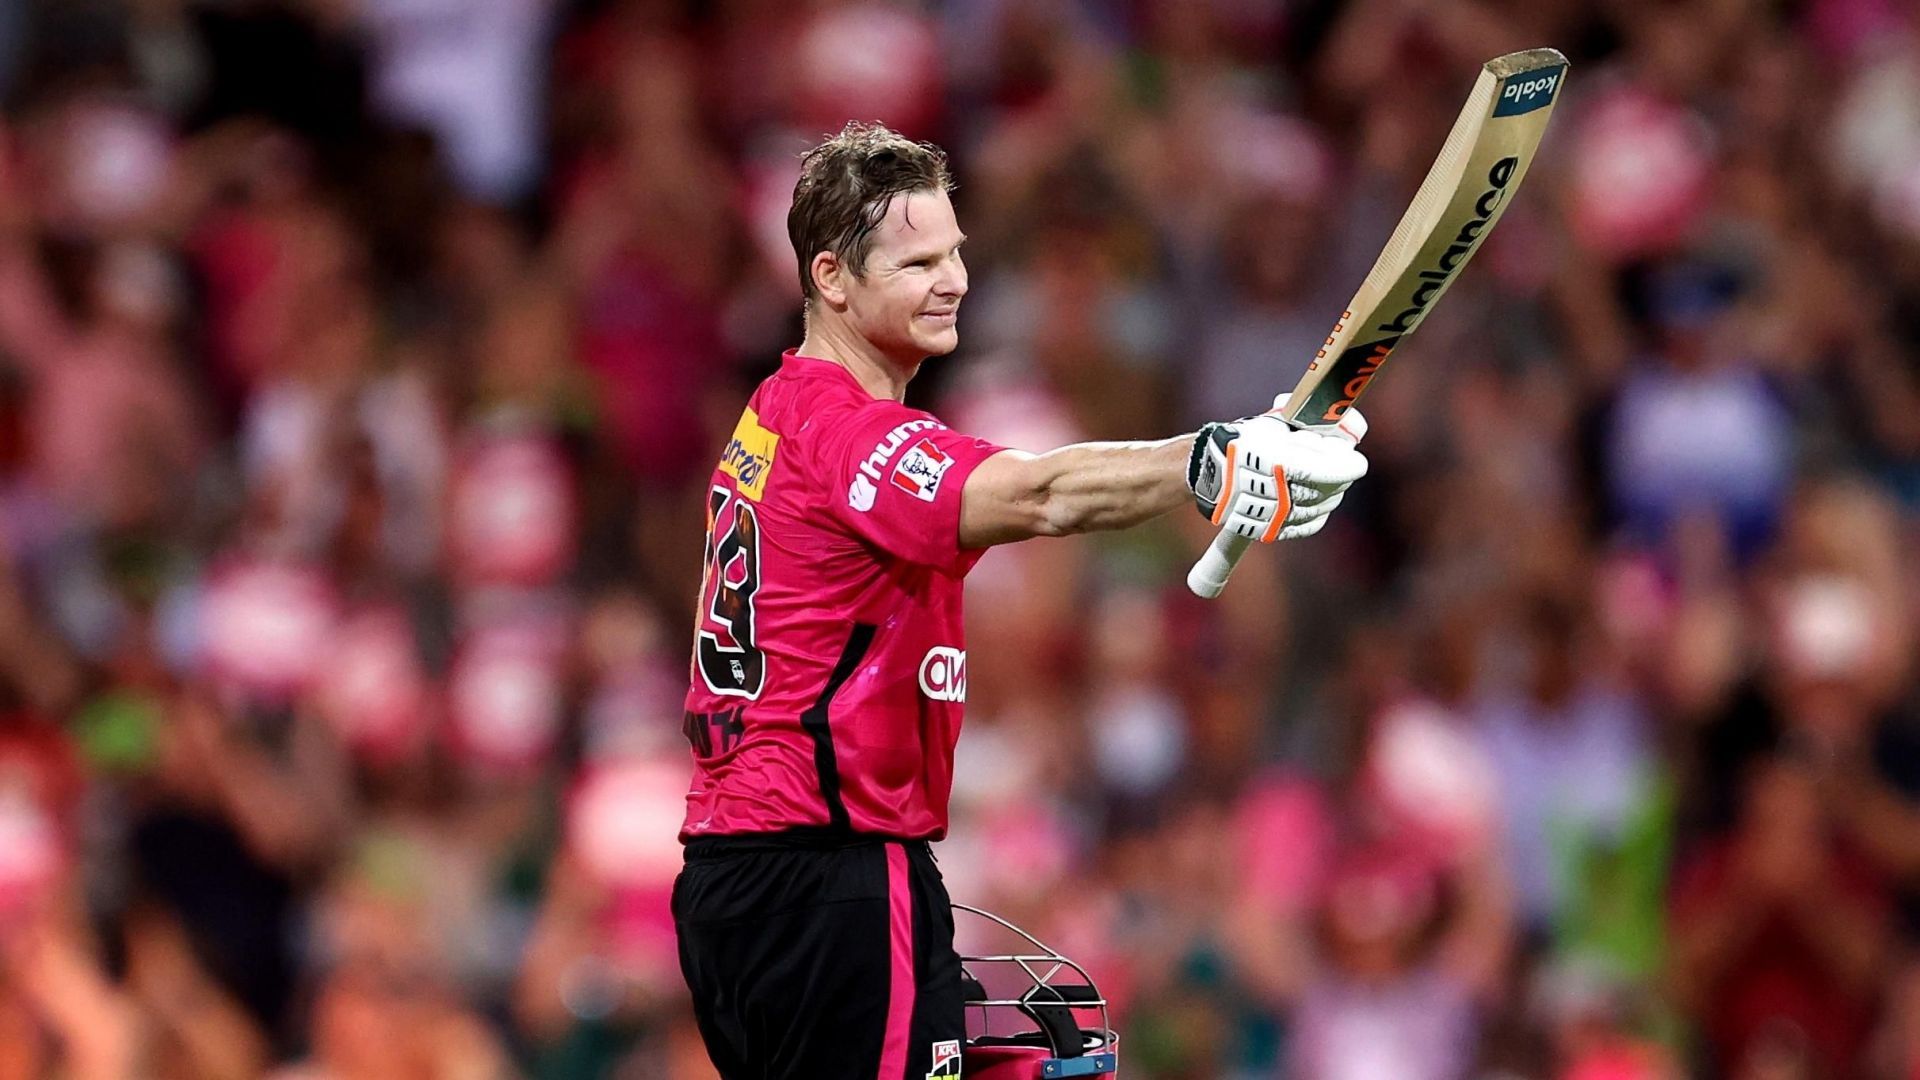 Steve Smith scored two back-to-back centuries in BBL 2022/23 (Image via Getty Images)